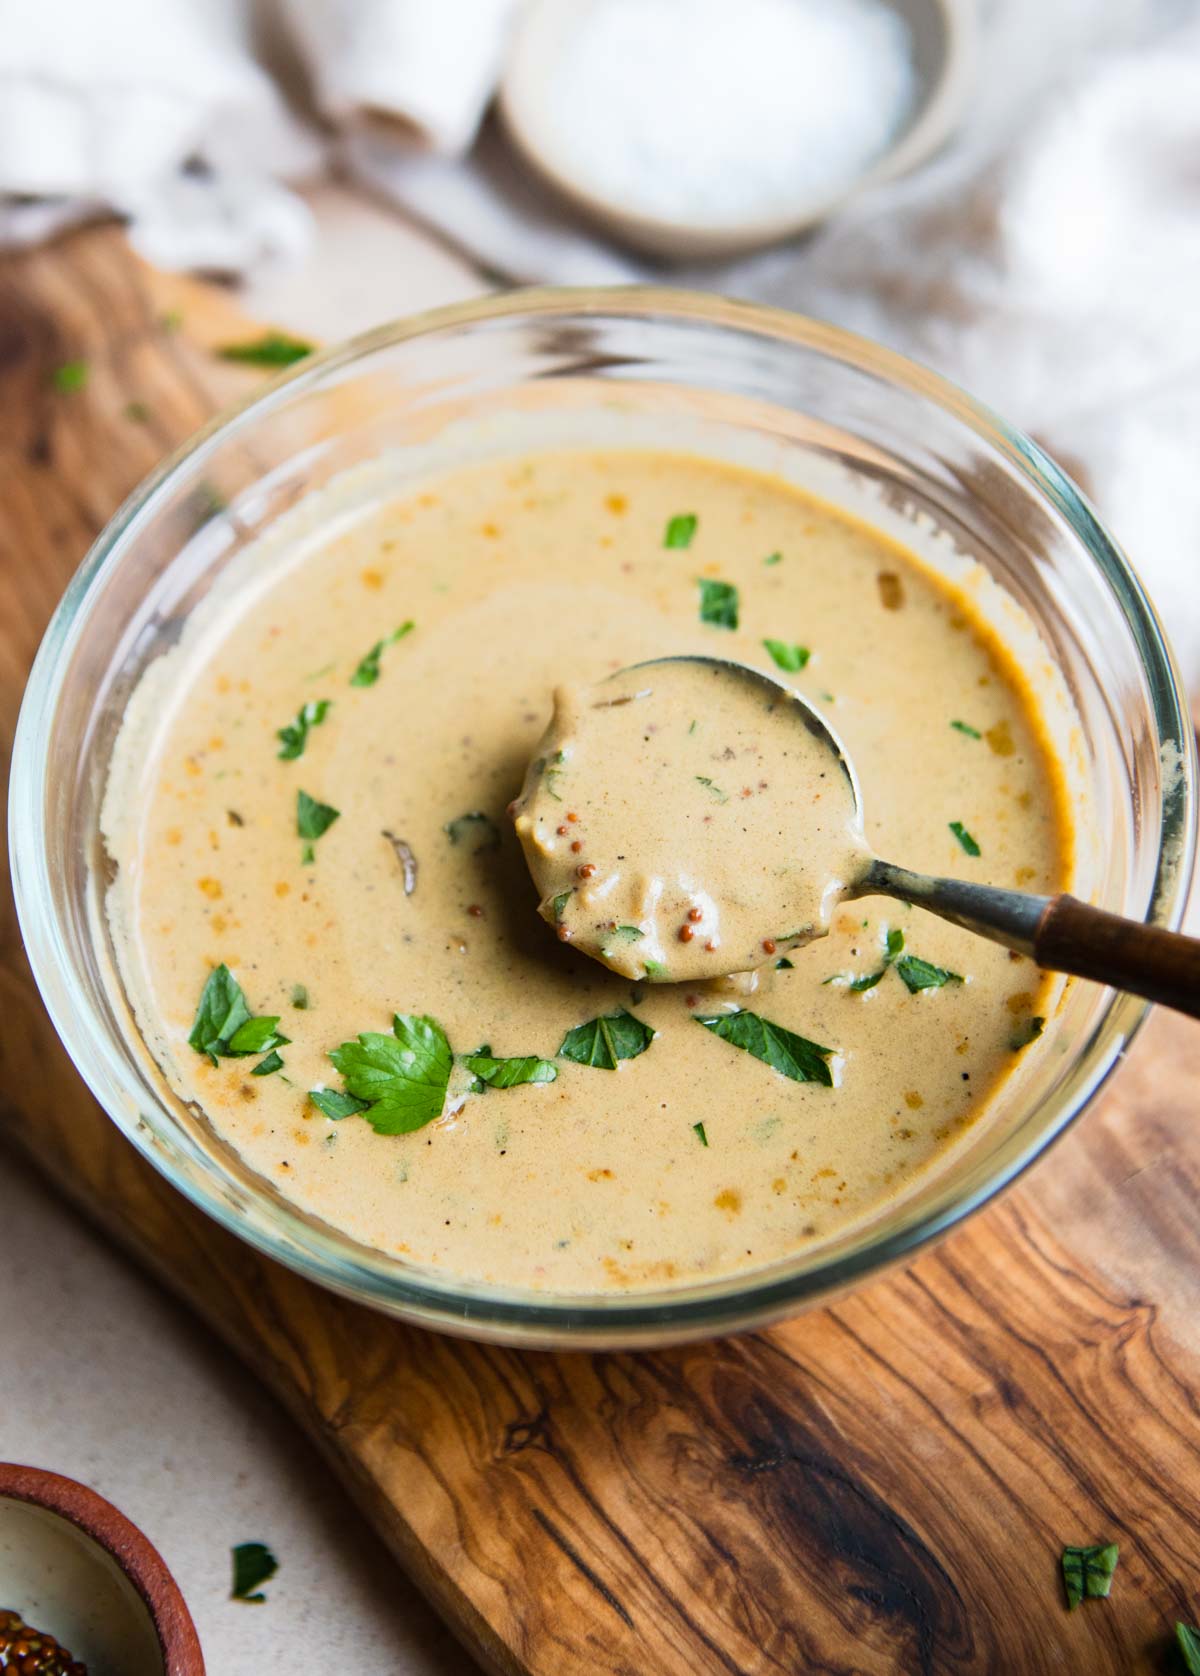 creamy dijon mustard sauce in a glass bowl with wooden spoon